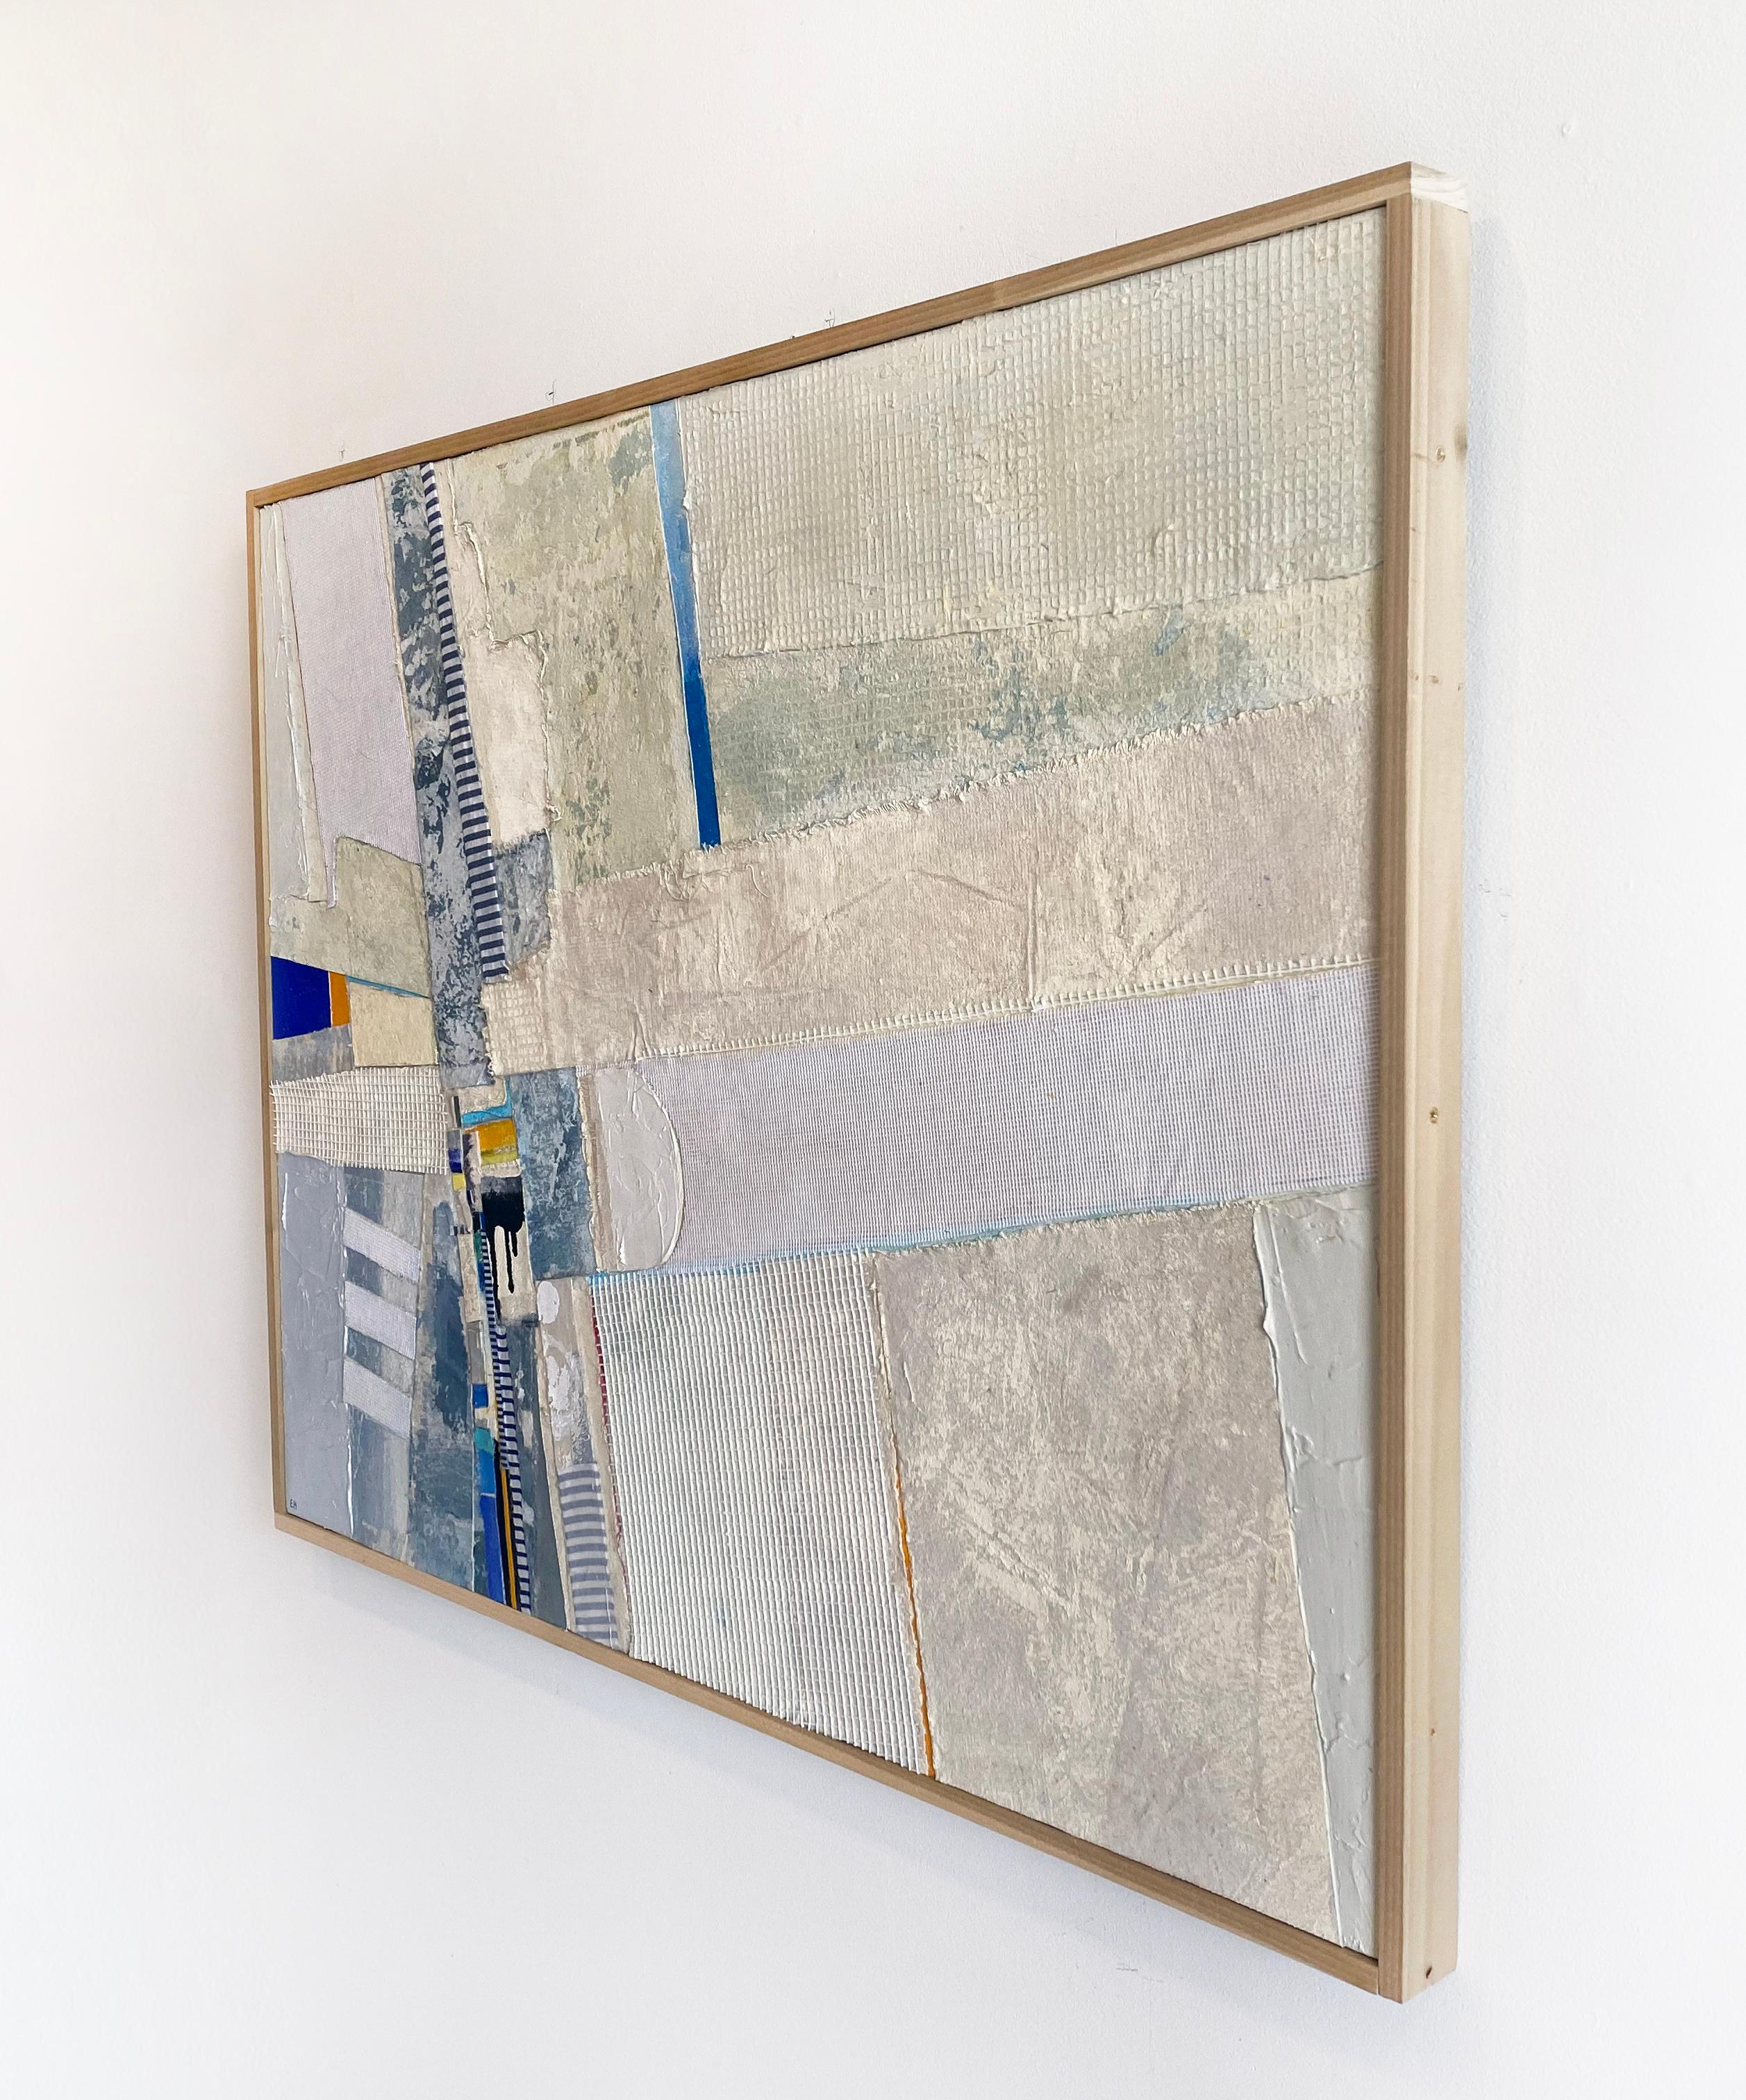 “The Front” by Eugene Healy, 2022. Mixed media on canvas.  30 x 40 in. This abstract, landscape painting features an abstracted seascape with land, sea, and sky in an aerial view. Calming colors of light blue, yellow, red, orange, grey, and white